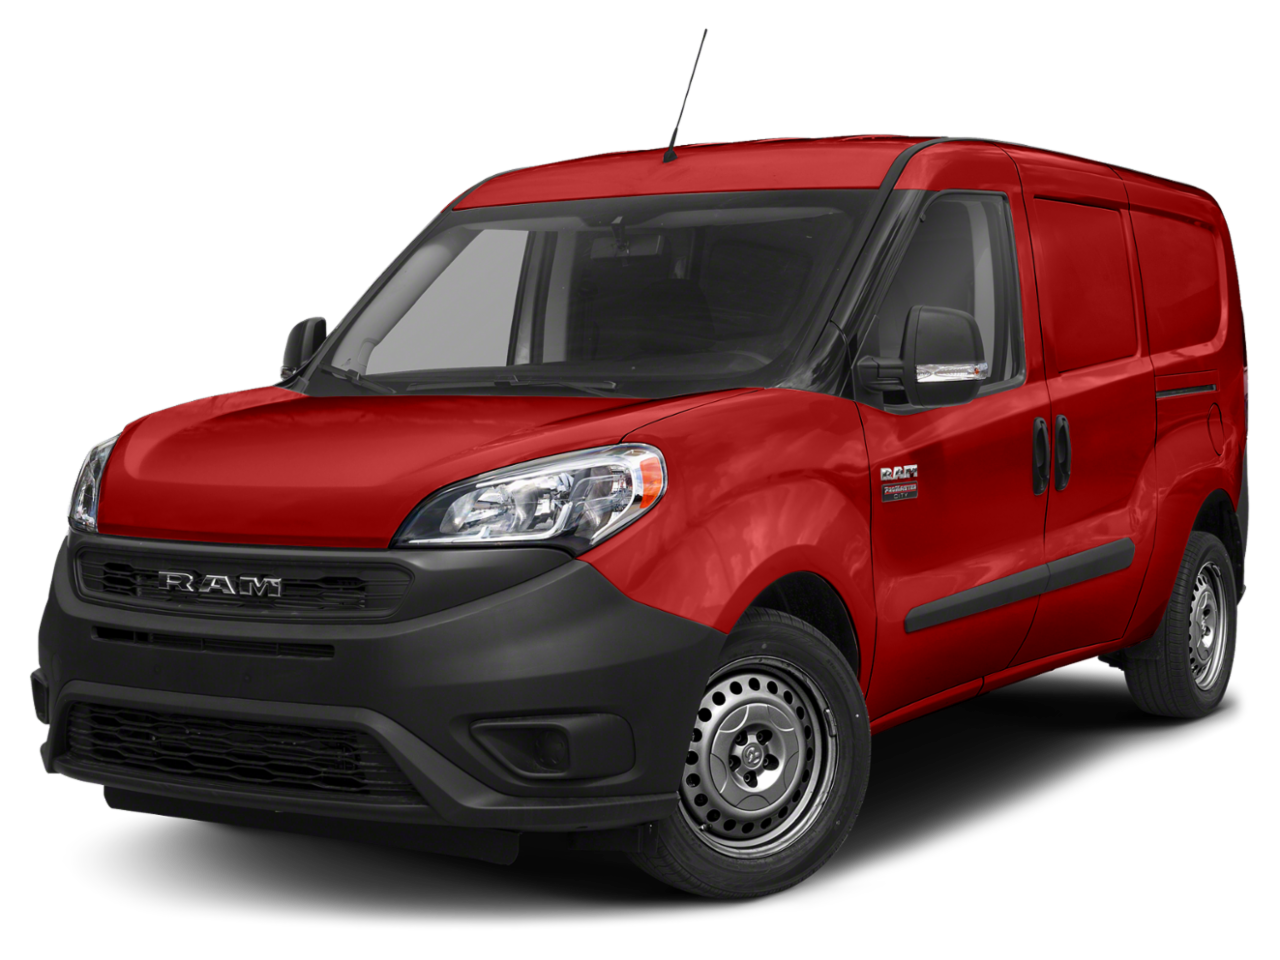 2021 Ram ProMaster City Cargo Van lease $509 Mo $0 Down Leases Available